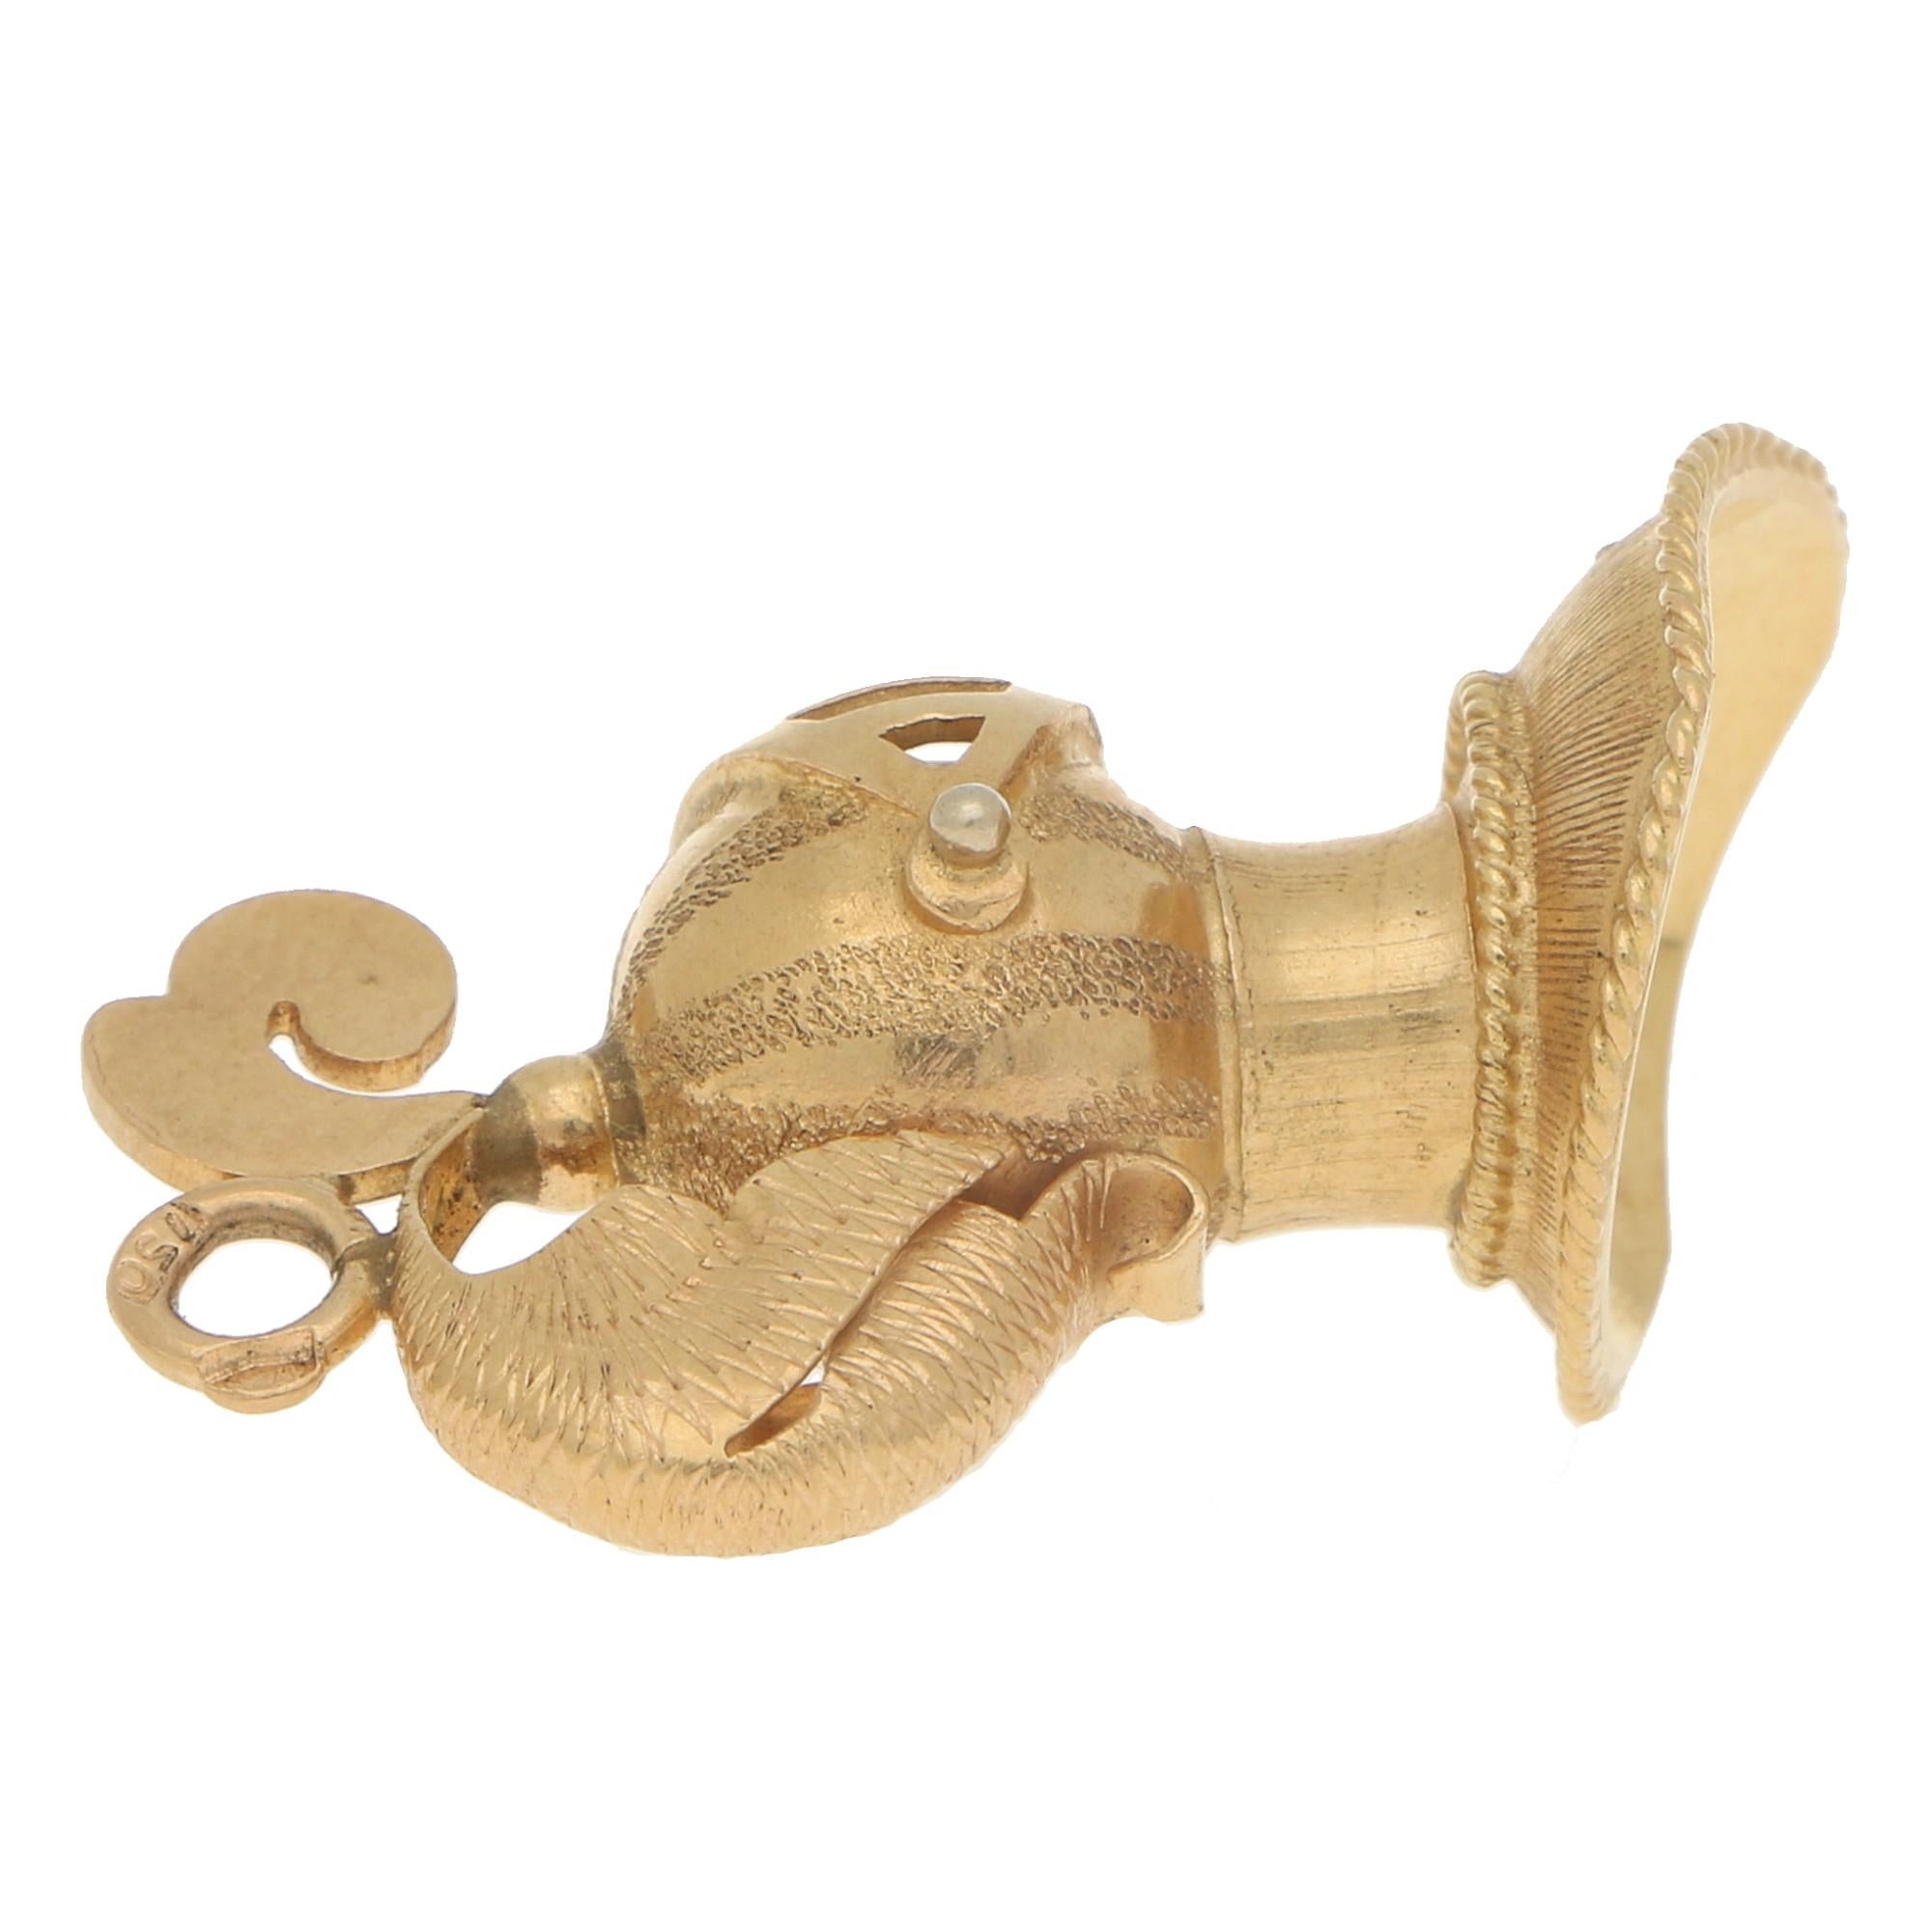 A rather interesting vintage knight helmet charm made of 18 karat yellow gold. 

This quirky piece is designed as a medieval knight's helmet and is beautifully detailed. From the feathering on the back of the helmet with the added Maltese cross on